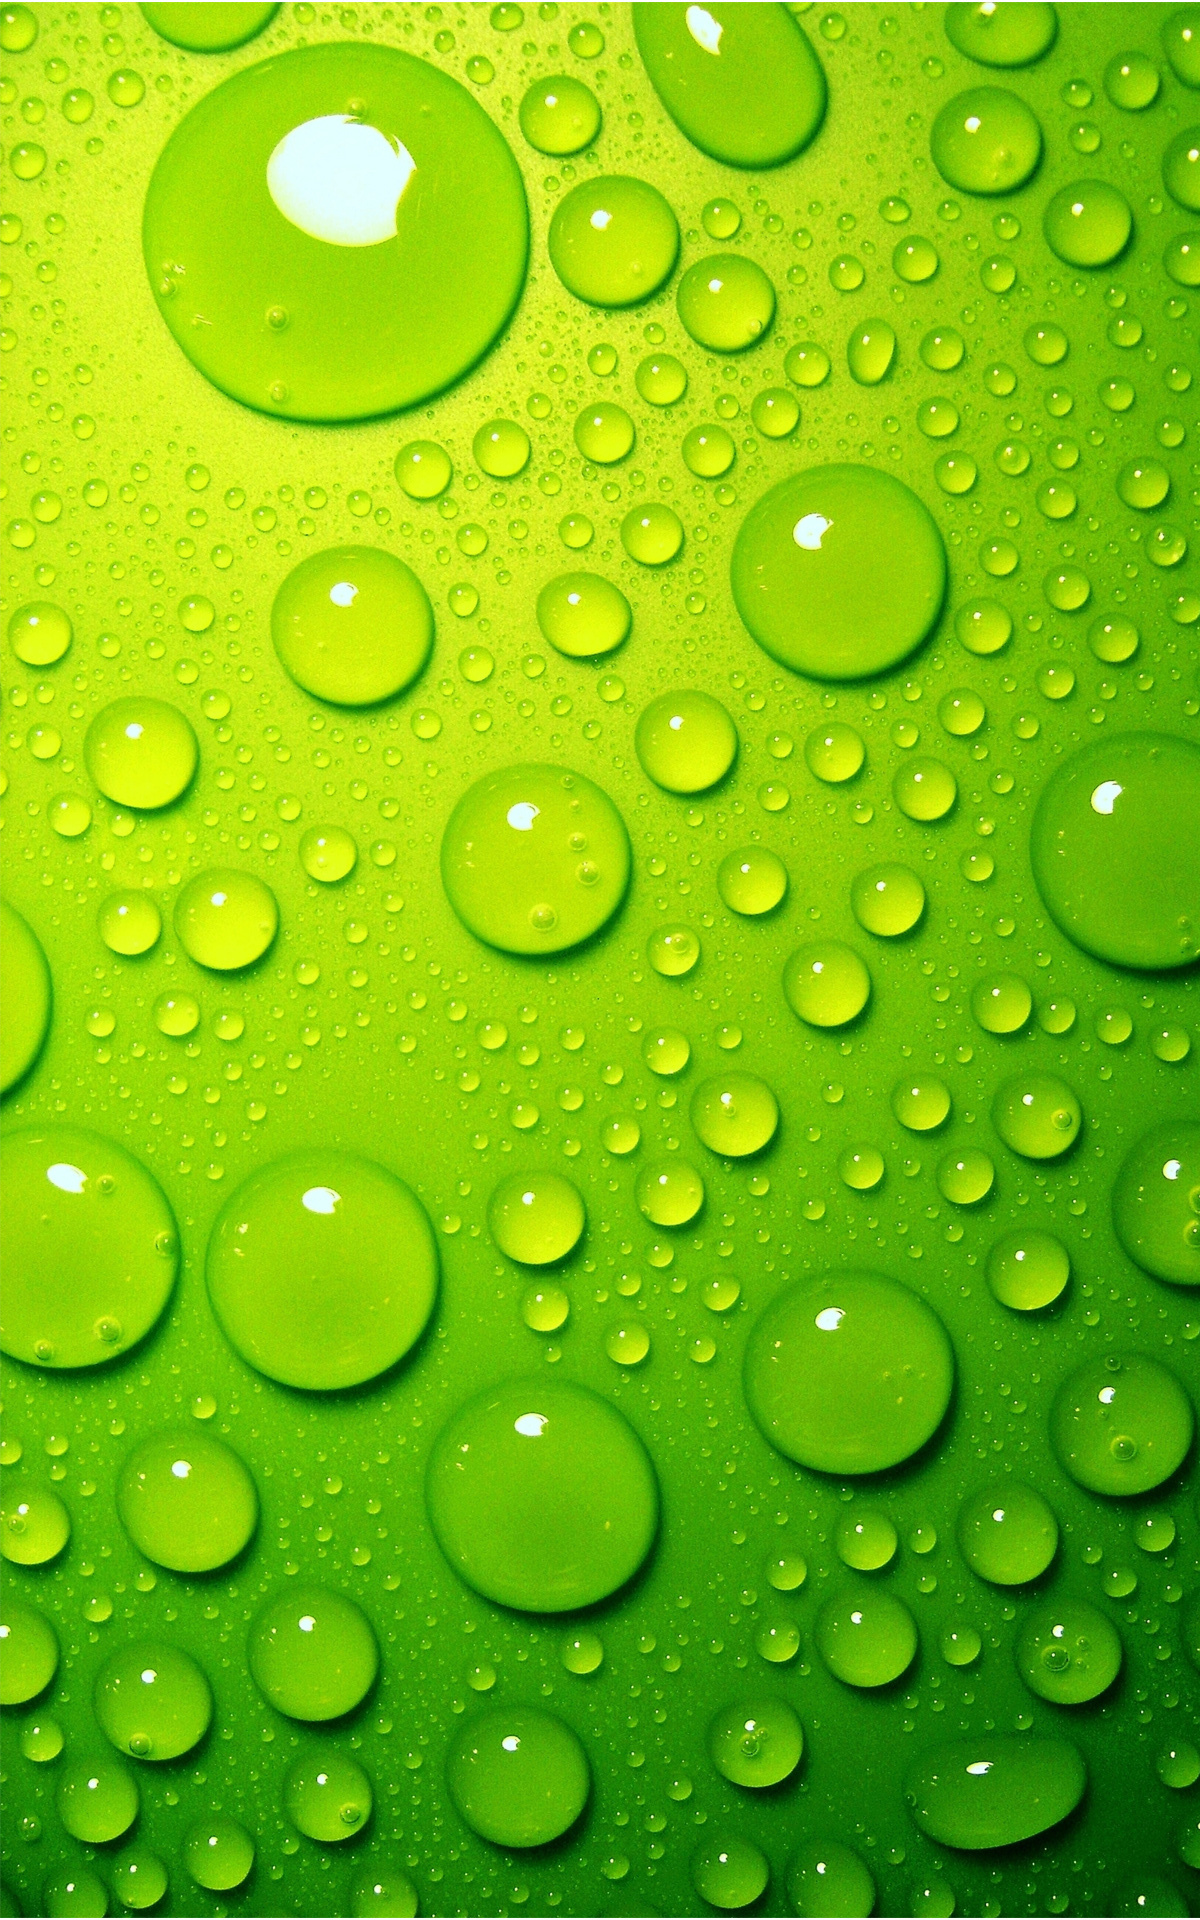 green, water, background, drops wallpaper for mobile